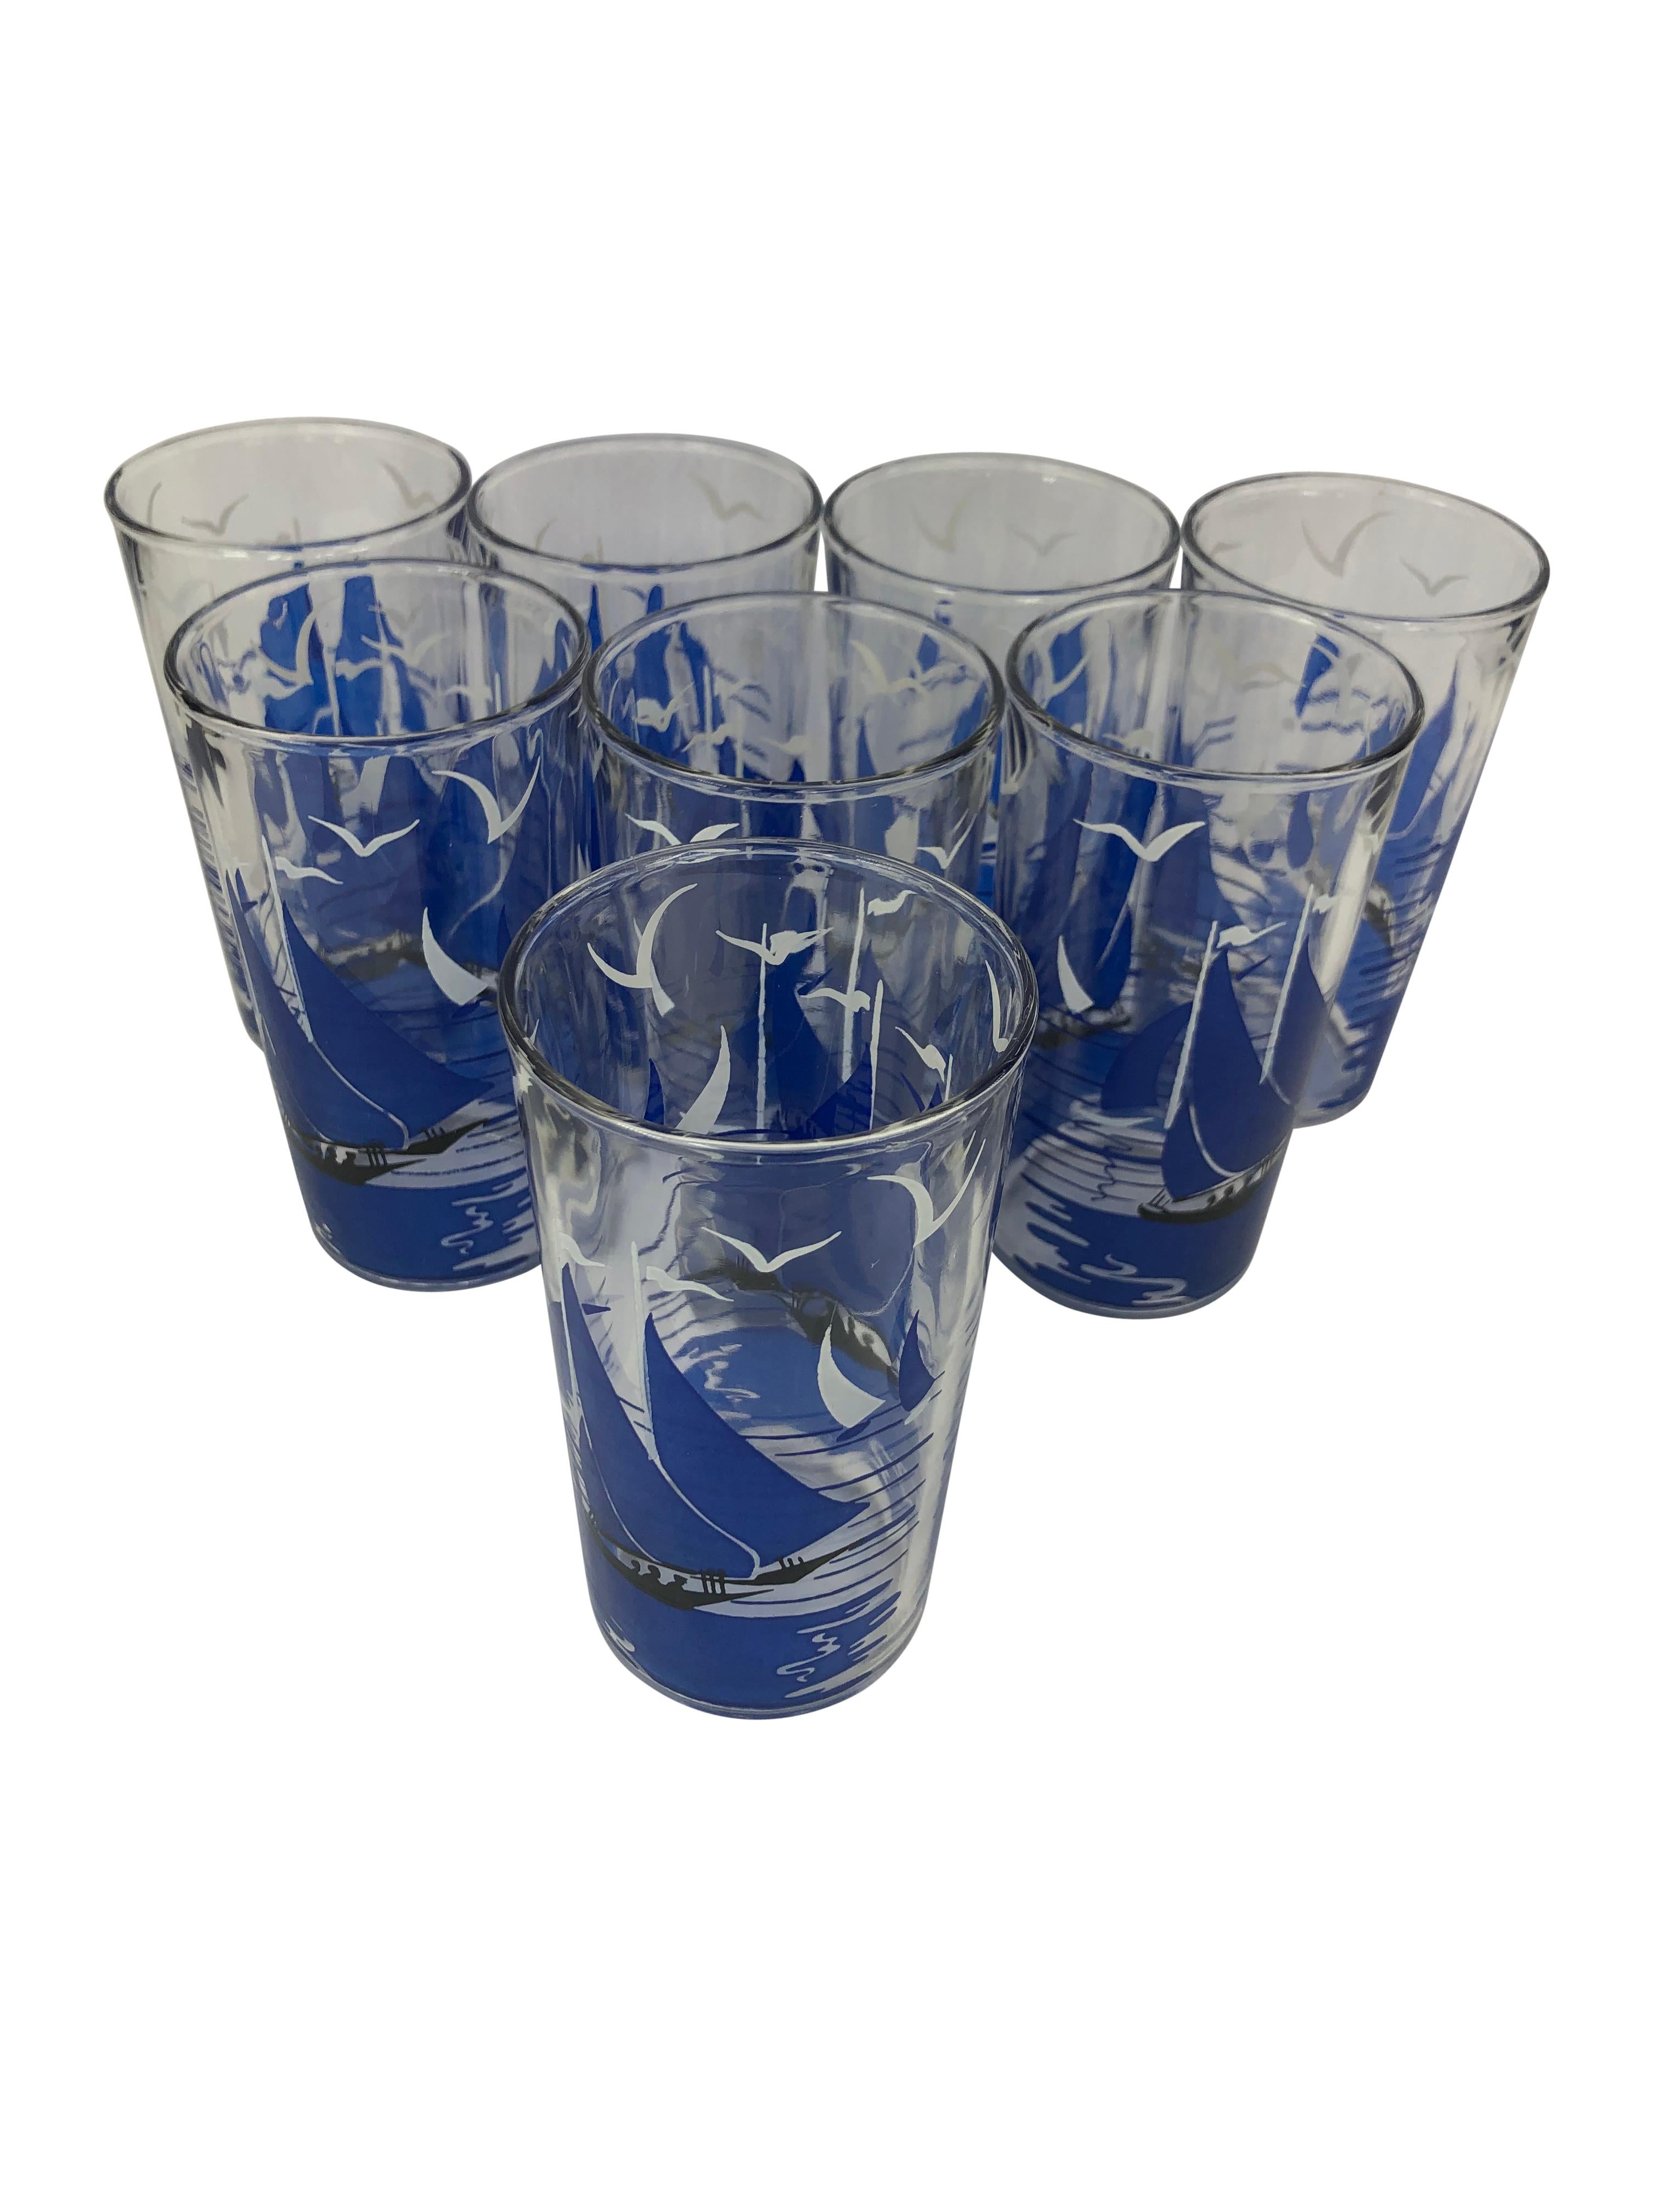 Mid-Century Modern Set of 8 Vintage Mid Century Tumblers With Sailboats in Boat-Shaped Caddy For Sale